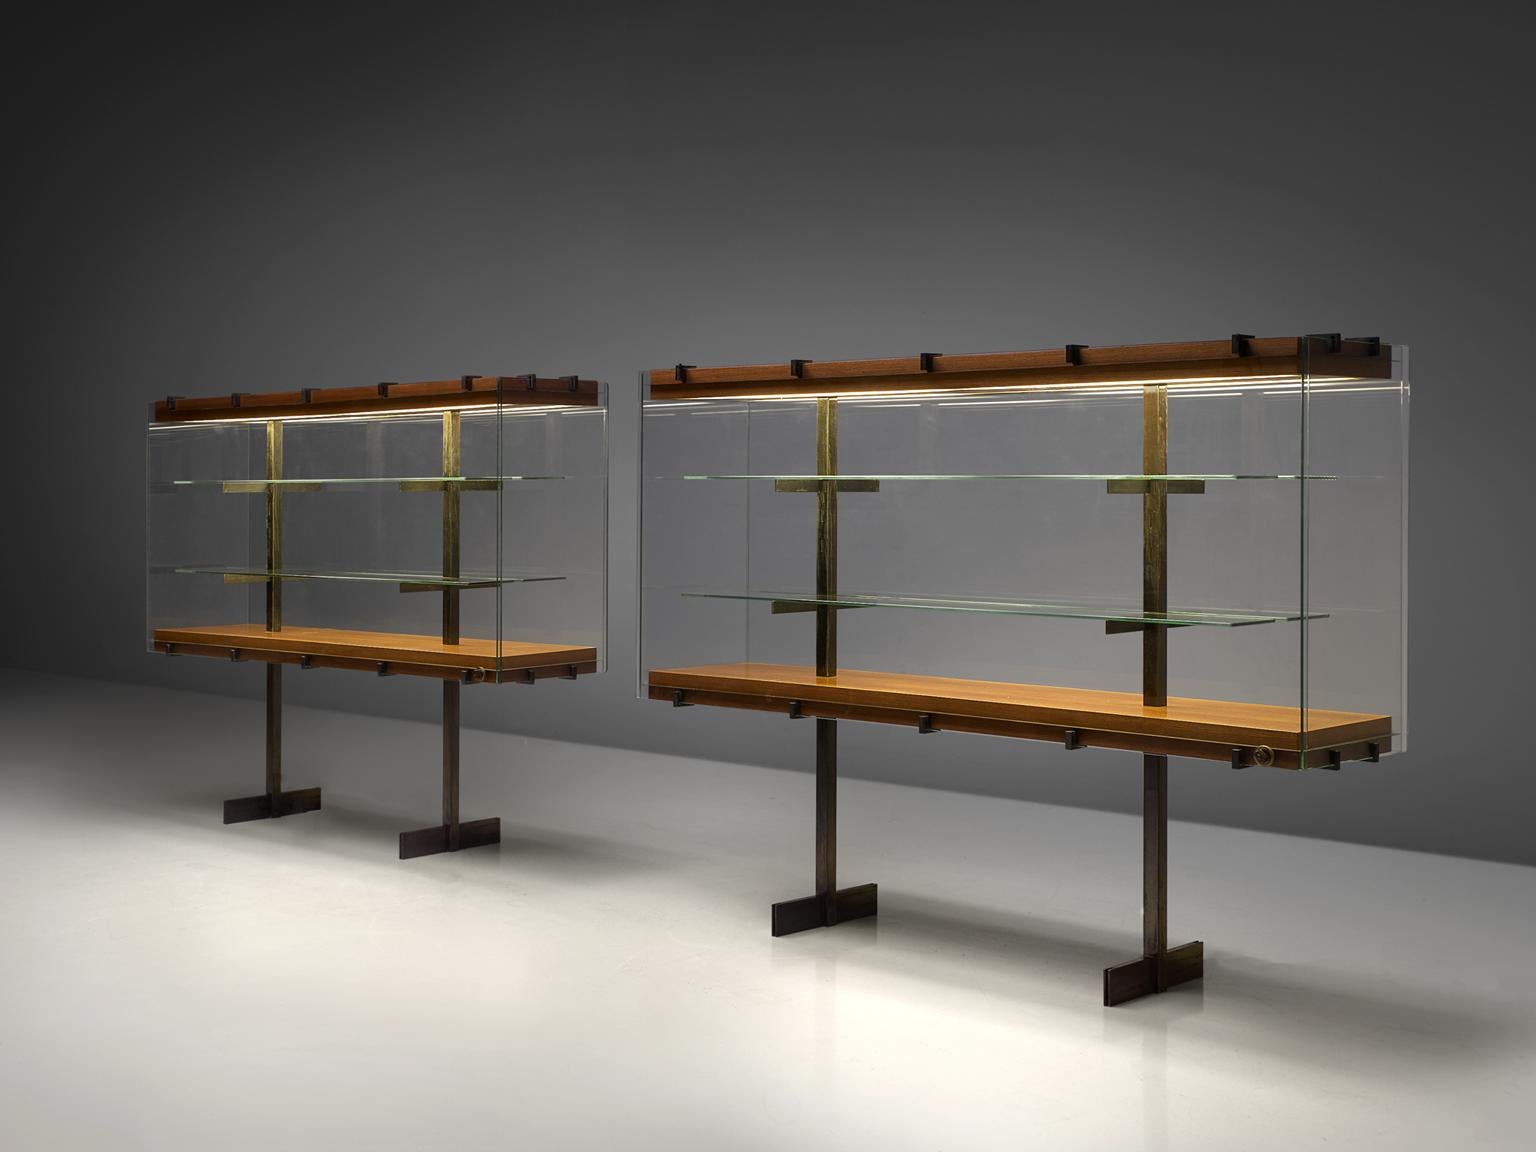 De Coene, vitrines, wood, steel and glass, Belgium, 1960s.

Large modernist showcases with two doors on the side all original glass and in good condition. Accompanied with steel and wood frames. The vitrine features the Brutalist and muscular